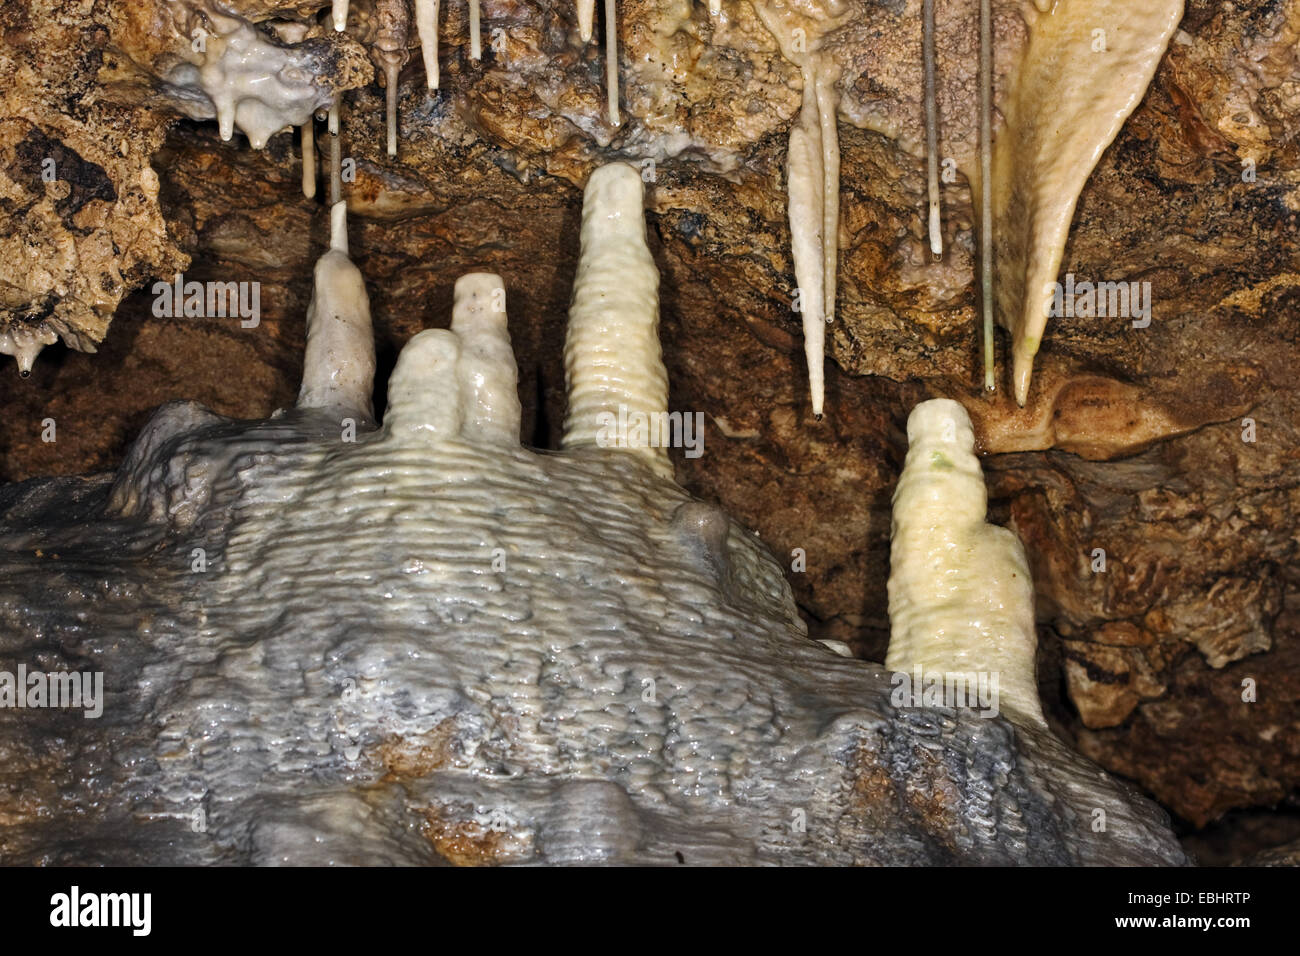 Group of stalagmites in the Lummelunda caves in Sweden. This formation is called The Altar. Stock Photo